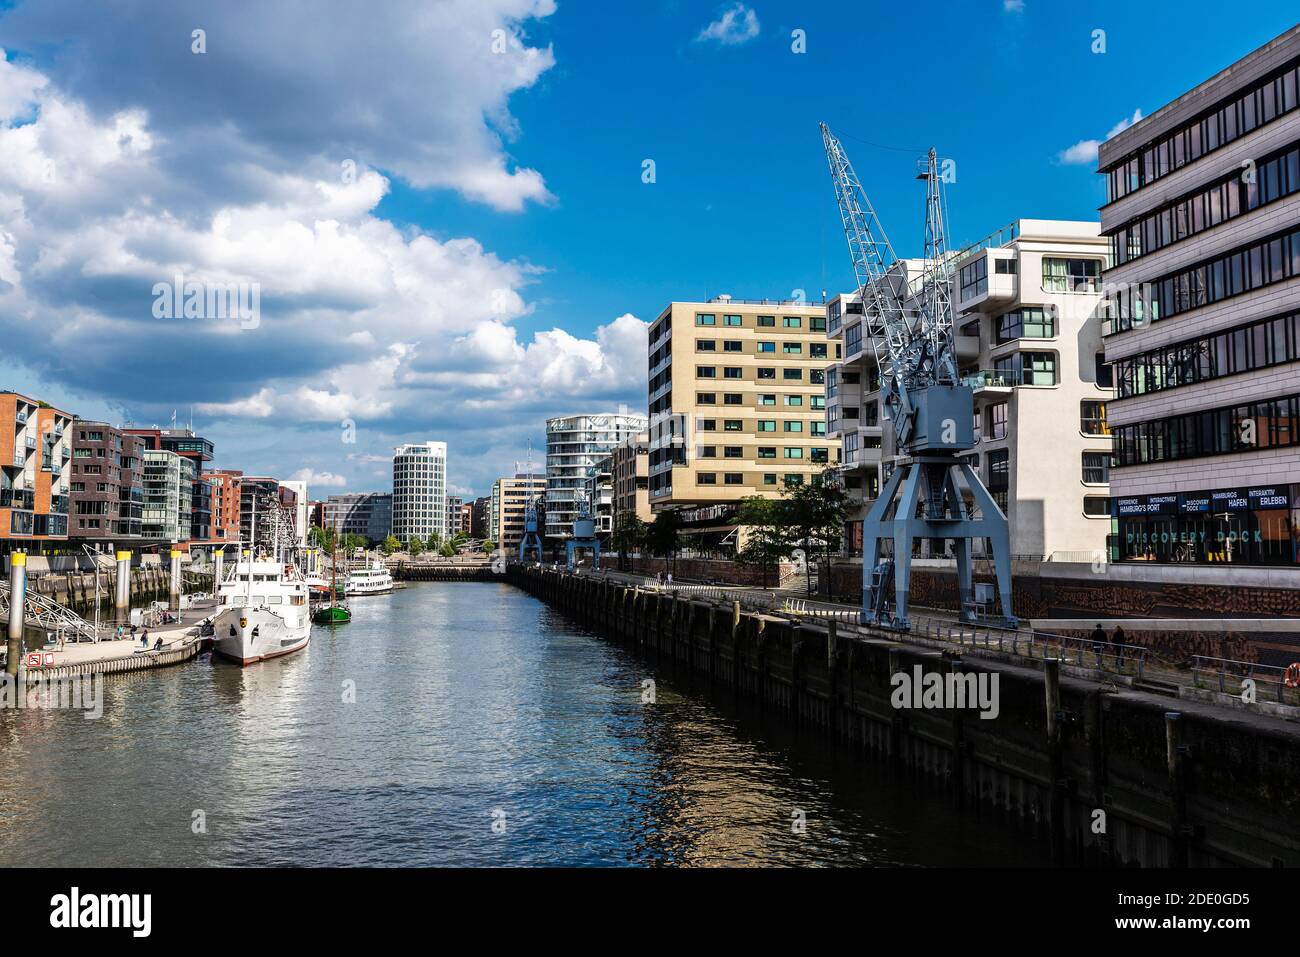 Hamburg, Germany - August 21, 2019: Modern buildings and a pier with boats, cranes and people around next to a canal in HafenCity, Hamburg, Germany Stock Photo